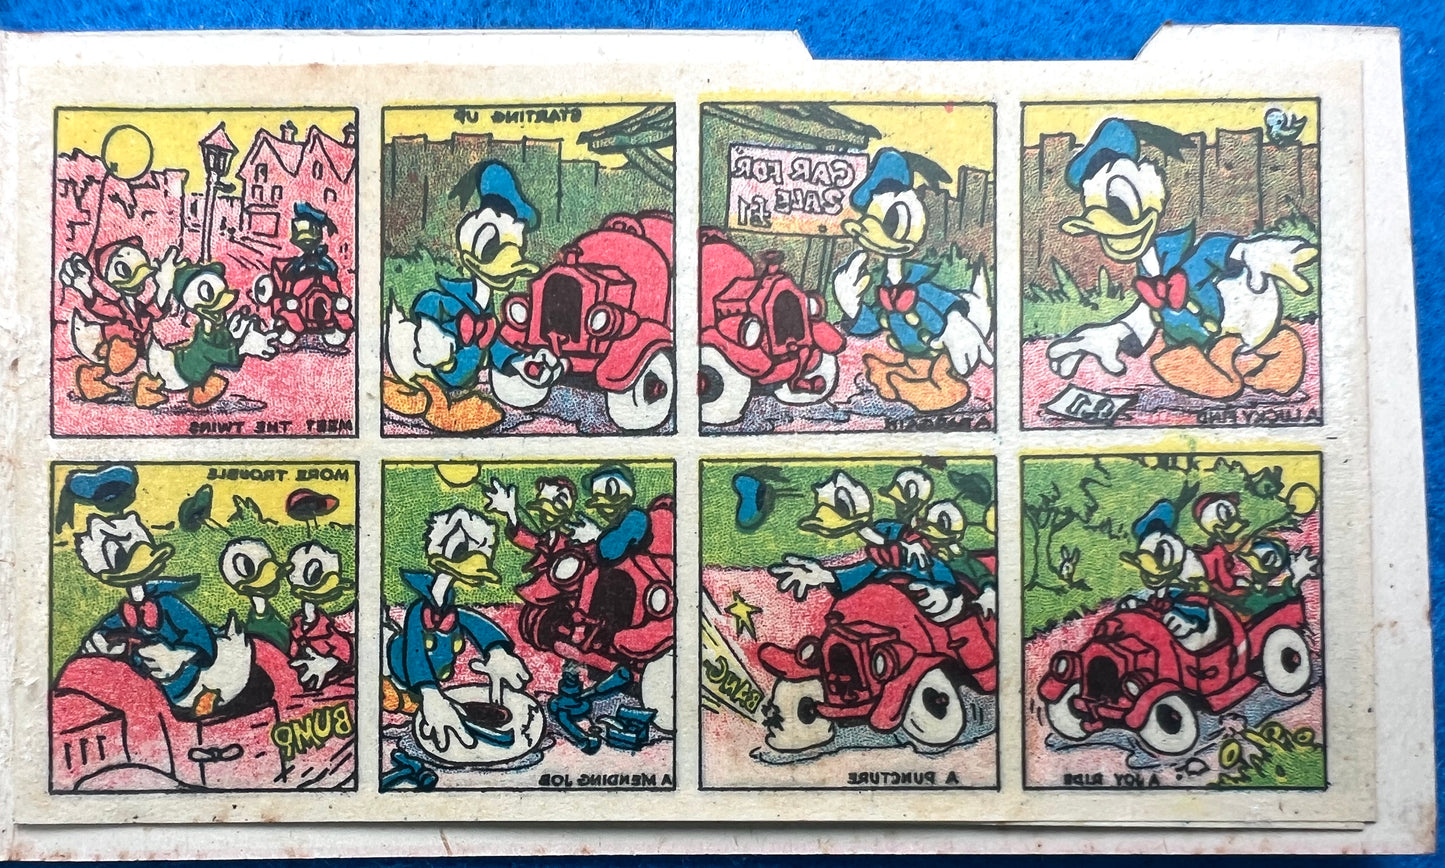 1950s DONALD DUCK Transfer Book by Permission of Walt Disney